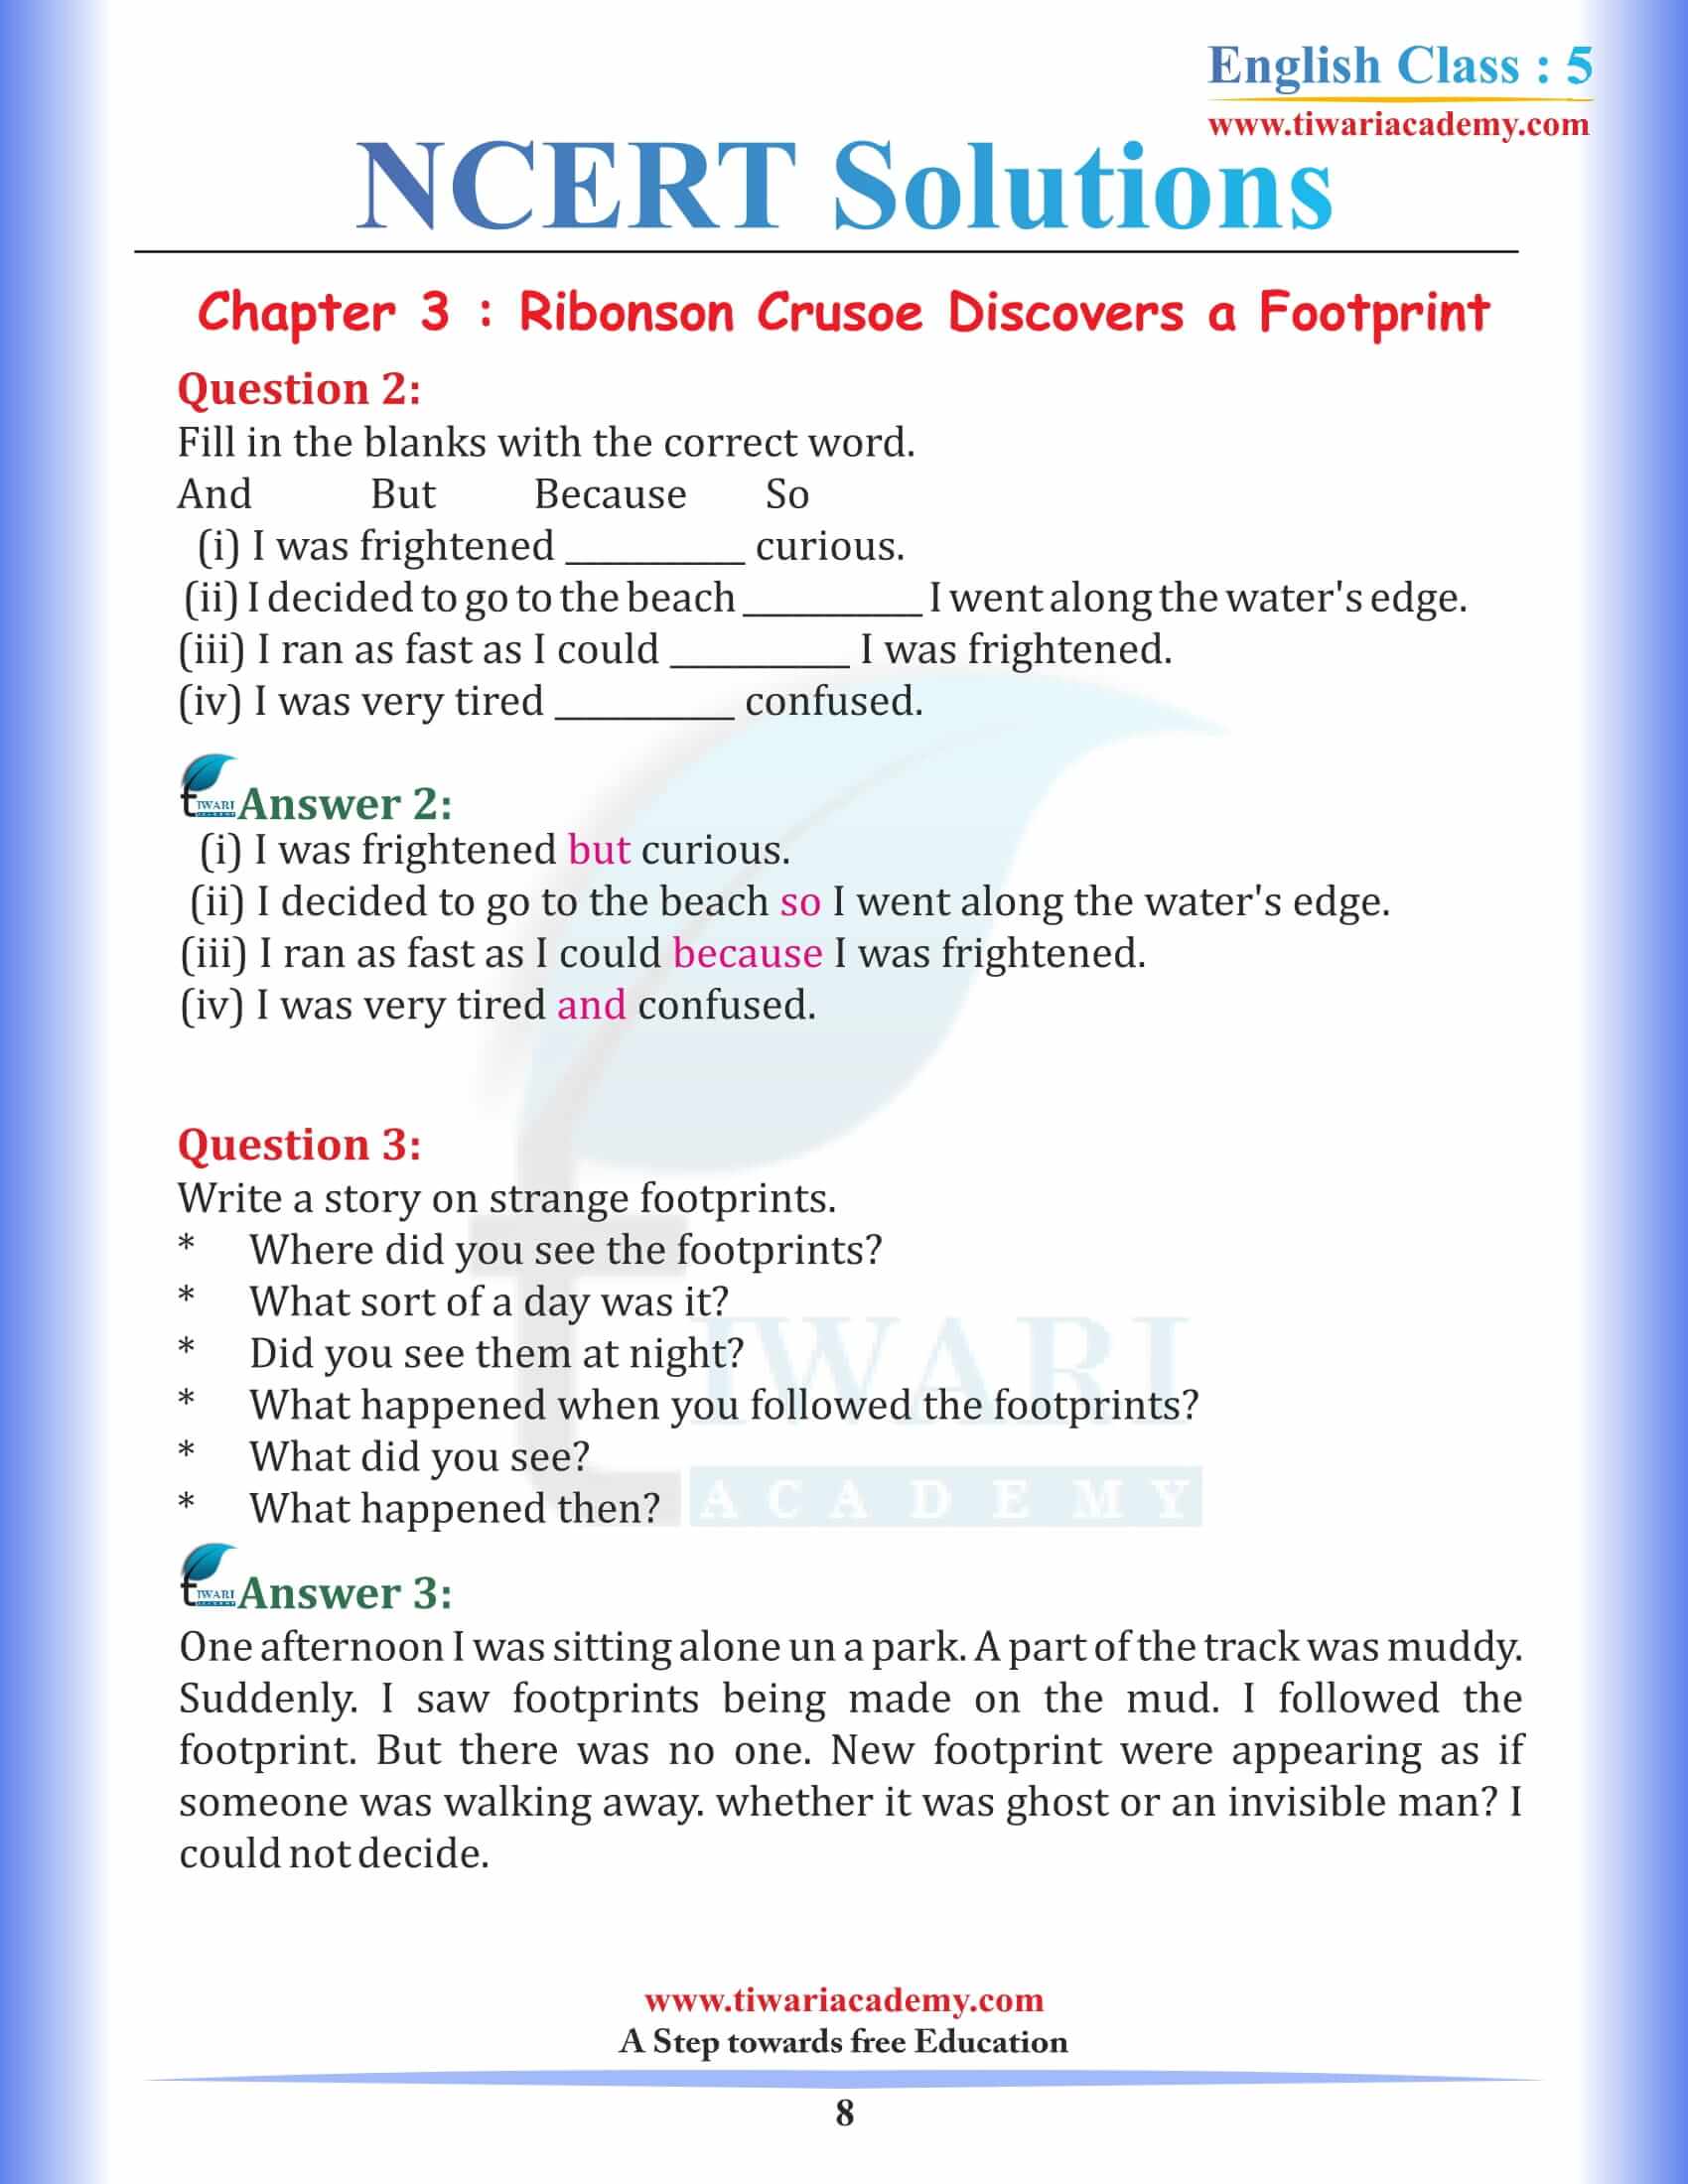 NCERT Solutions for Class 5 English Chapter 3 Robinson Crusoe Discovers a footprint question answers